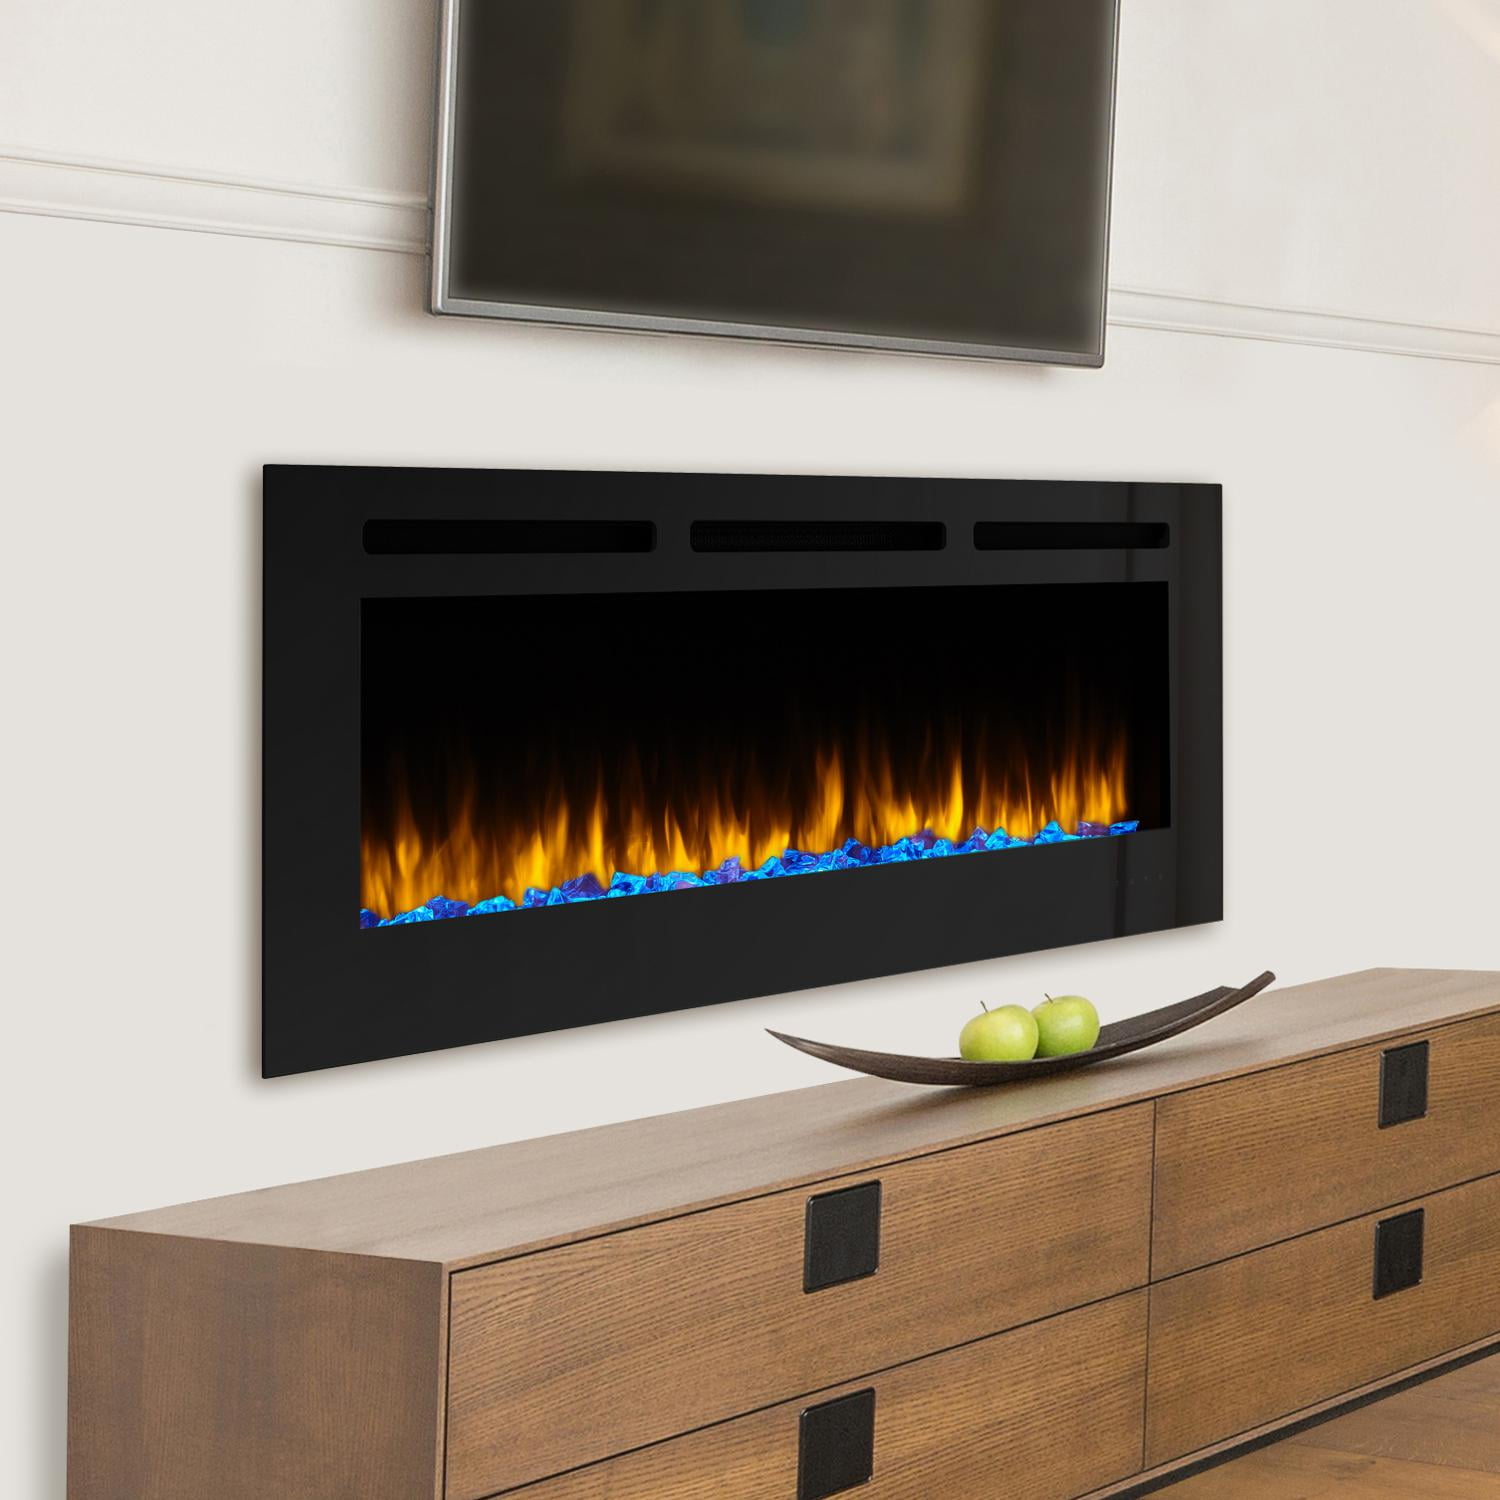 60 Inch Wall Mount Electric Fireplace, Indoor Electric Wall Fireplace